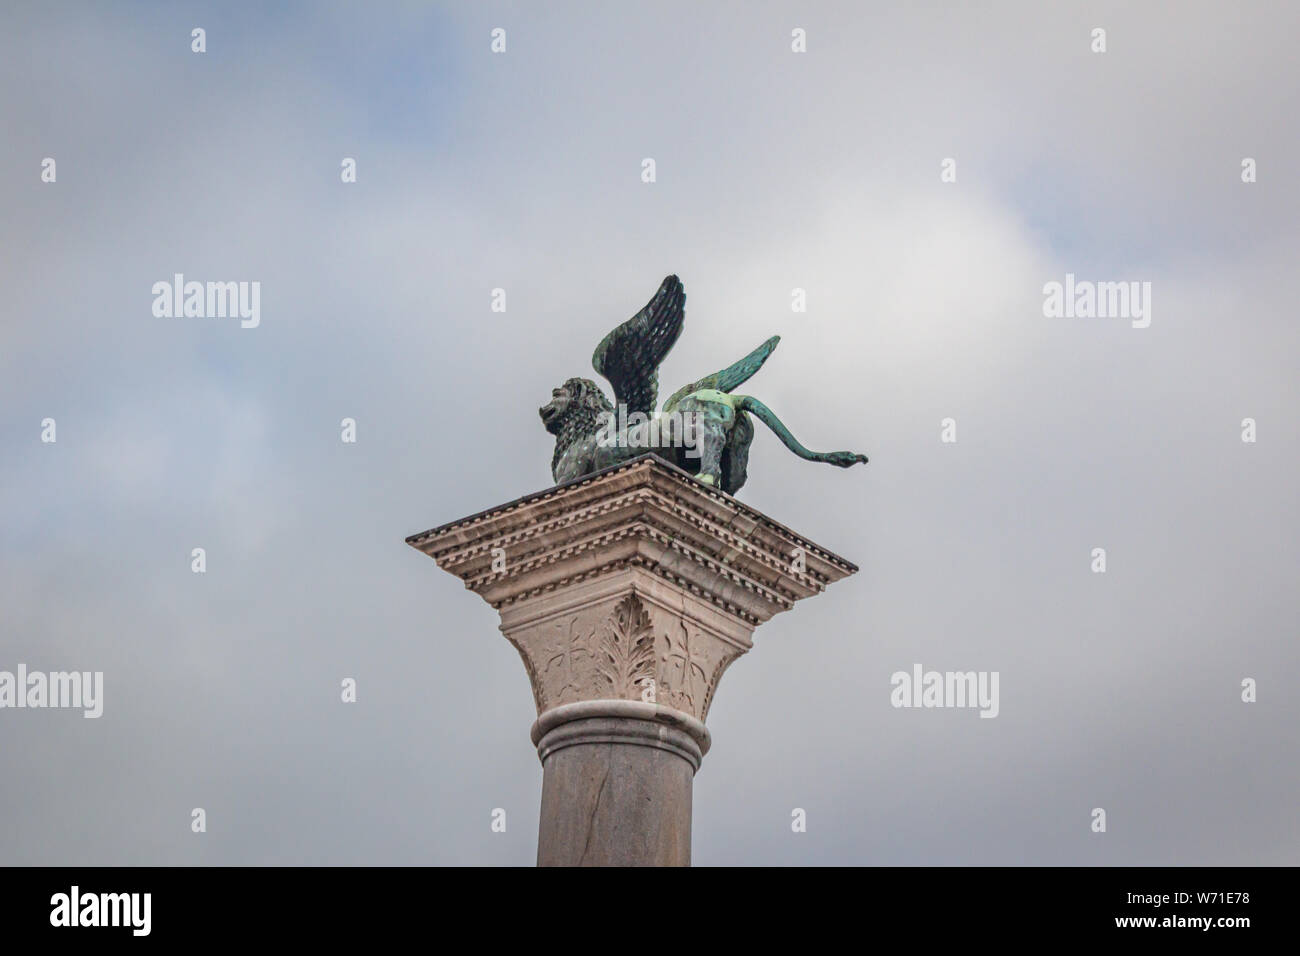 The Lion of Venice is an ancient bronze winged lion sculpture in the Piazza San Marco of Venice, Italy Stock Photo